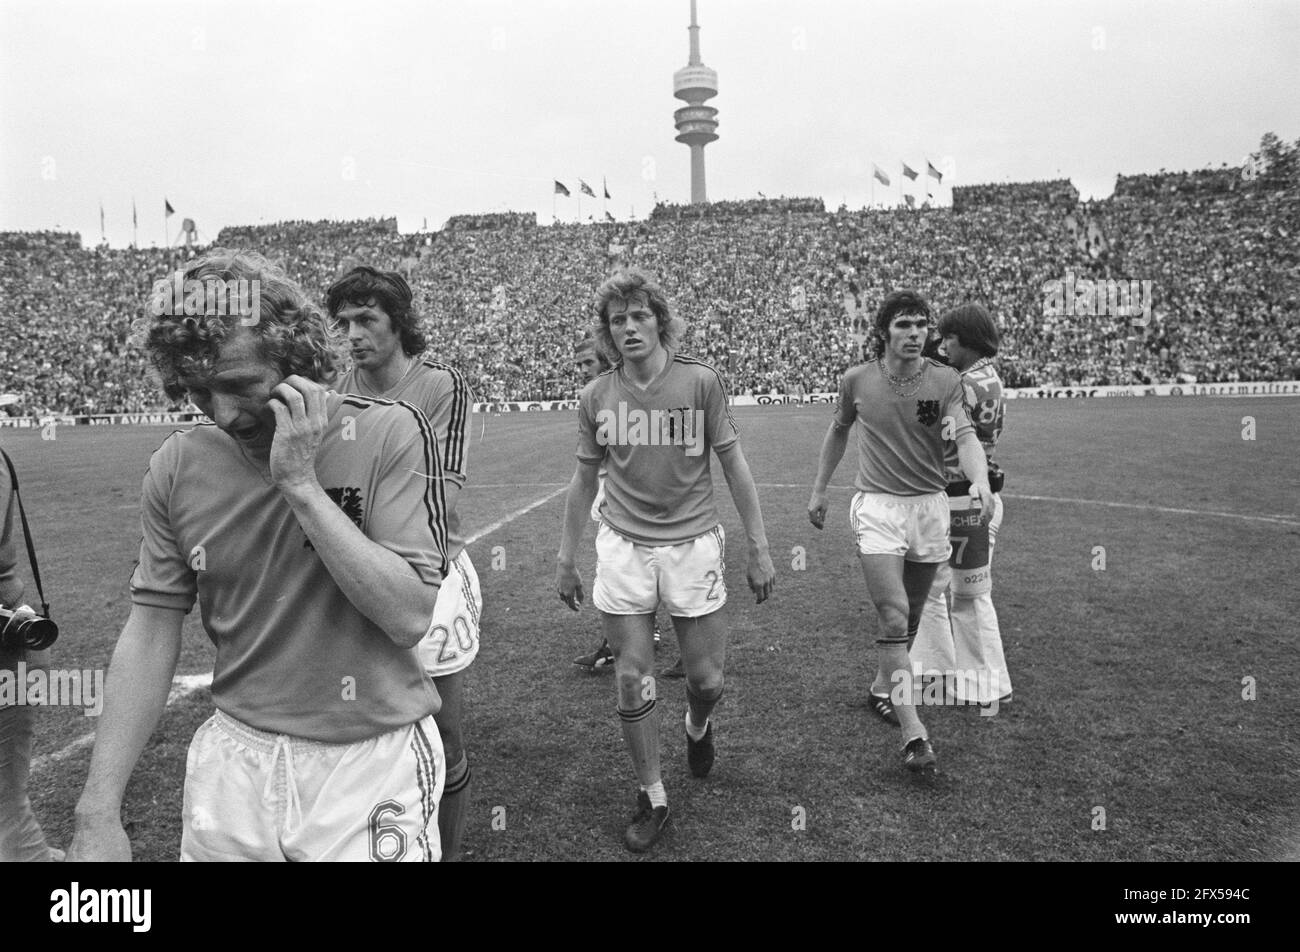 Final World Cup 1974 in Munich, West Germany against the Netherlands 2-1; from left to right Wim Jansen Suurbier, Arie Haan and Wim van Hanegem, July 7, 1974, finals, sports, soccer, world championships, The Netherlands, 20th century press agency photo, news to remember, documentary, historic photography 1945-1990, visual stories, human history of the Twentieth Century, capturing moments in time Stock Photo